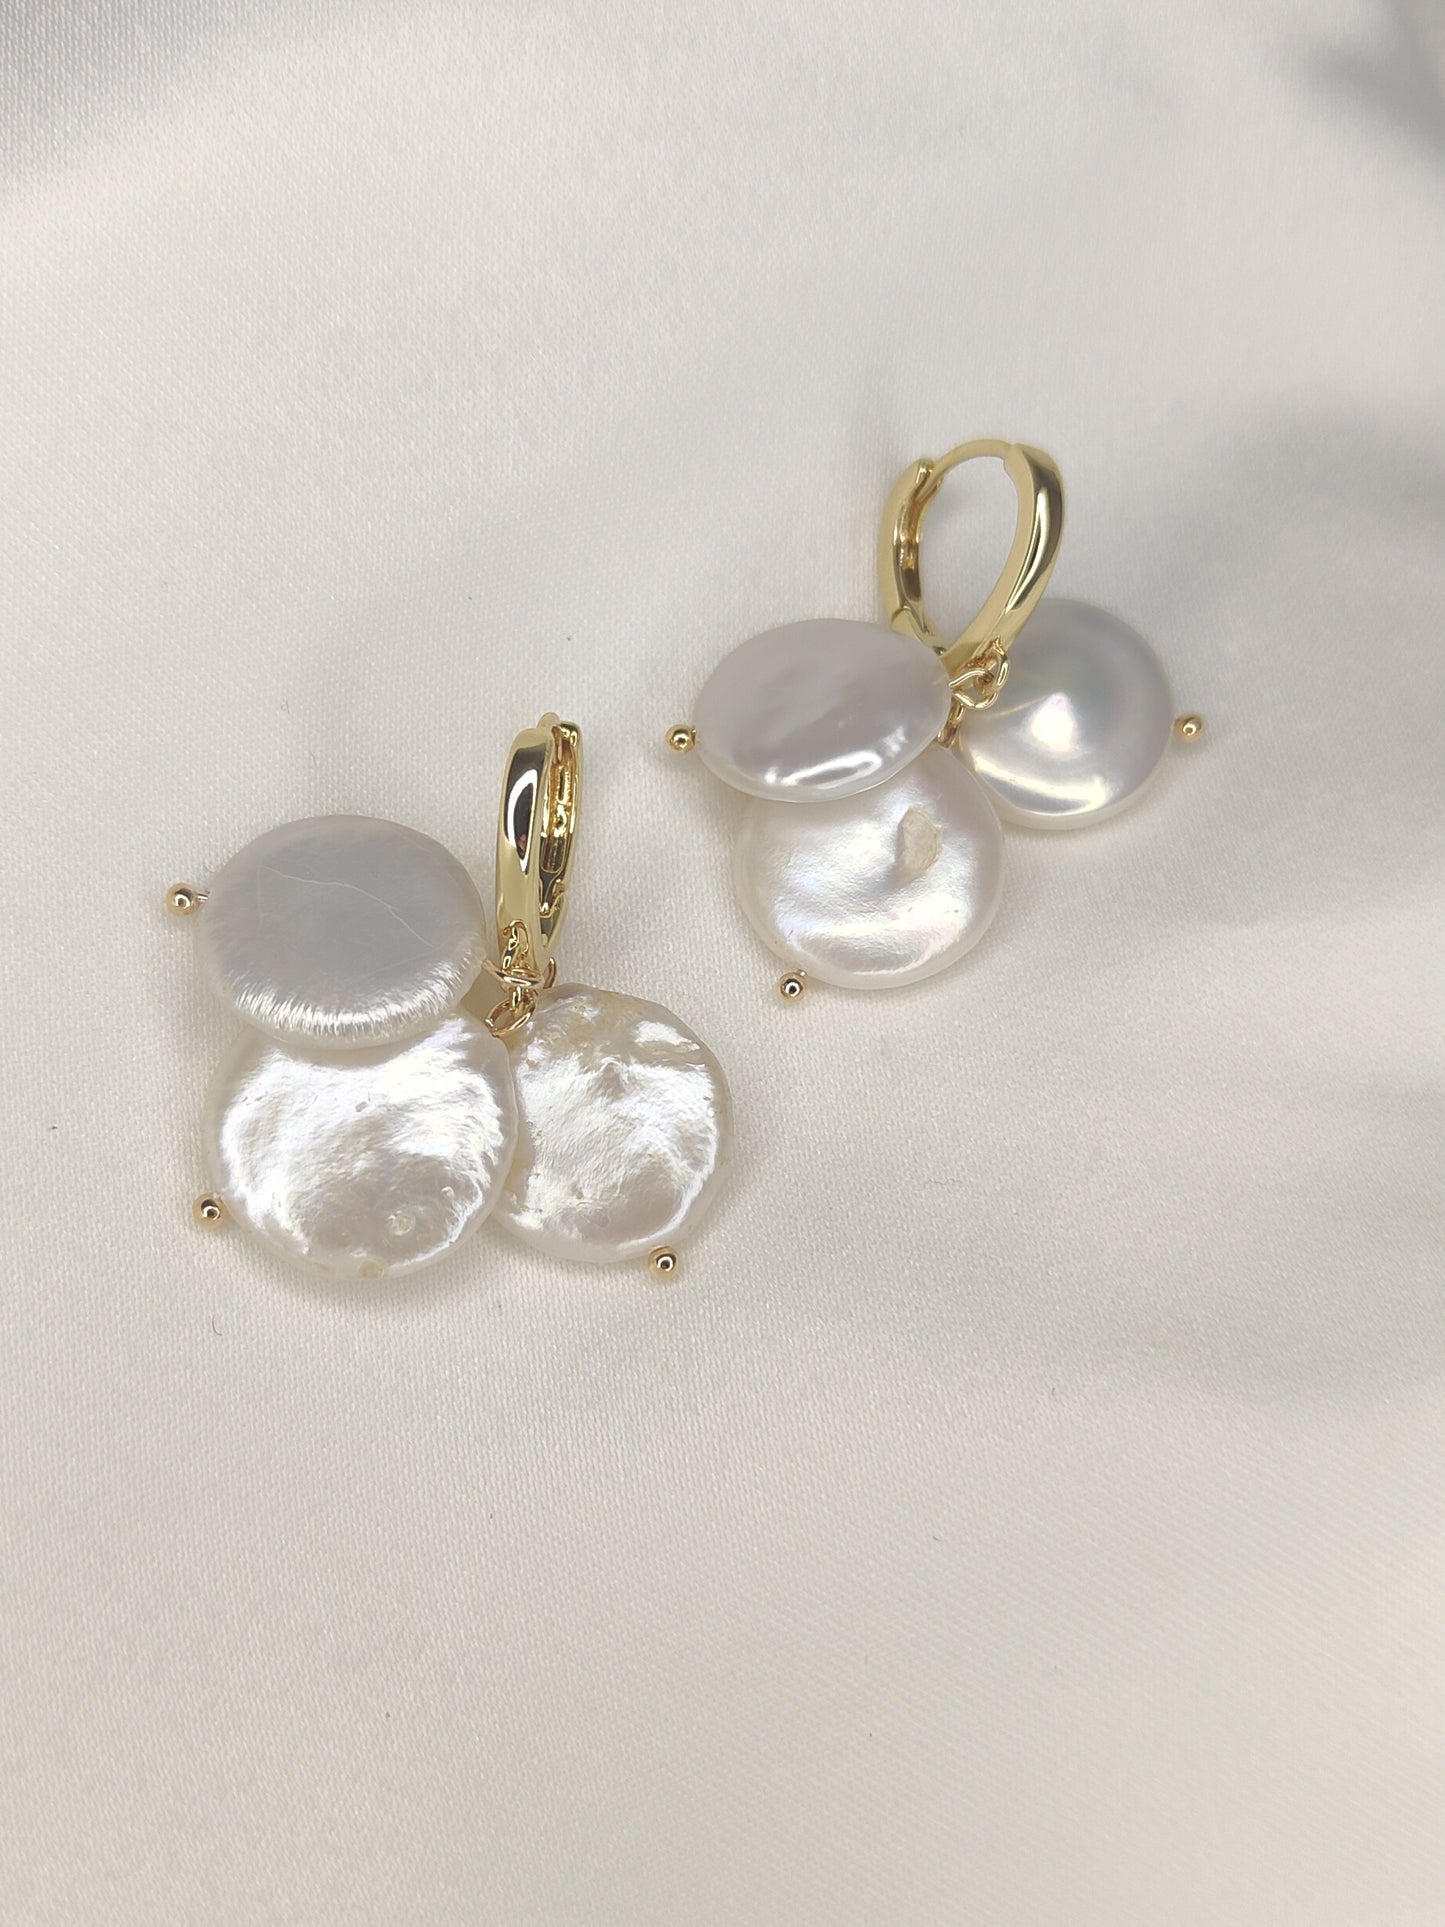 EVELYN - Statement Pearls & Gold Bridal Earrings